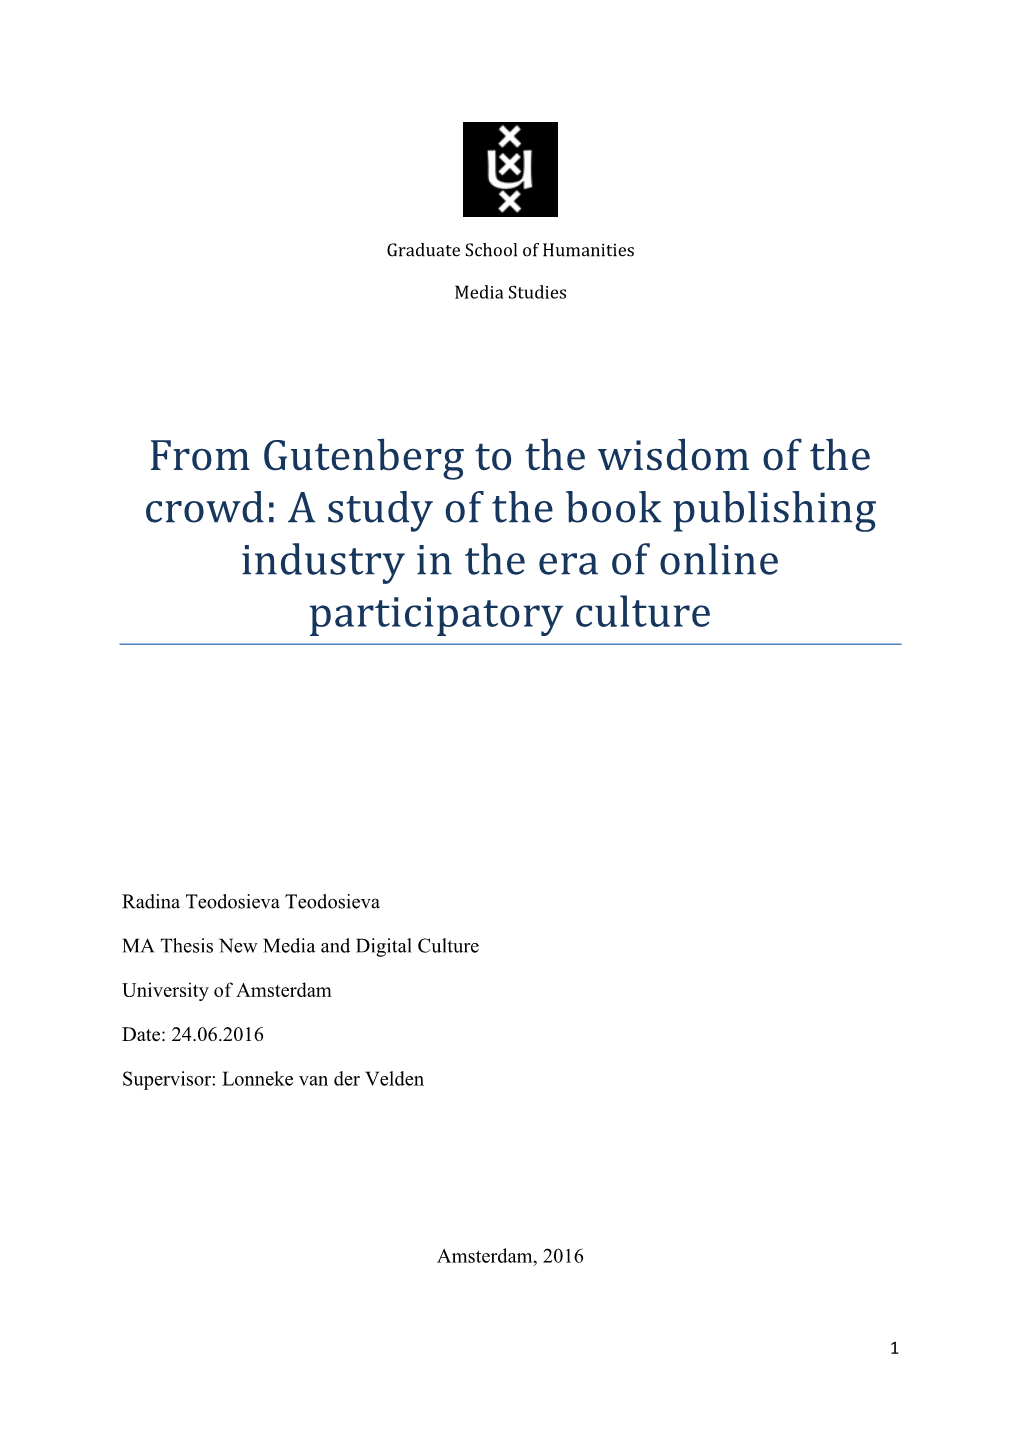 A Study of the Book Publishing Industry in the Era of Online Participatory Culture